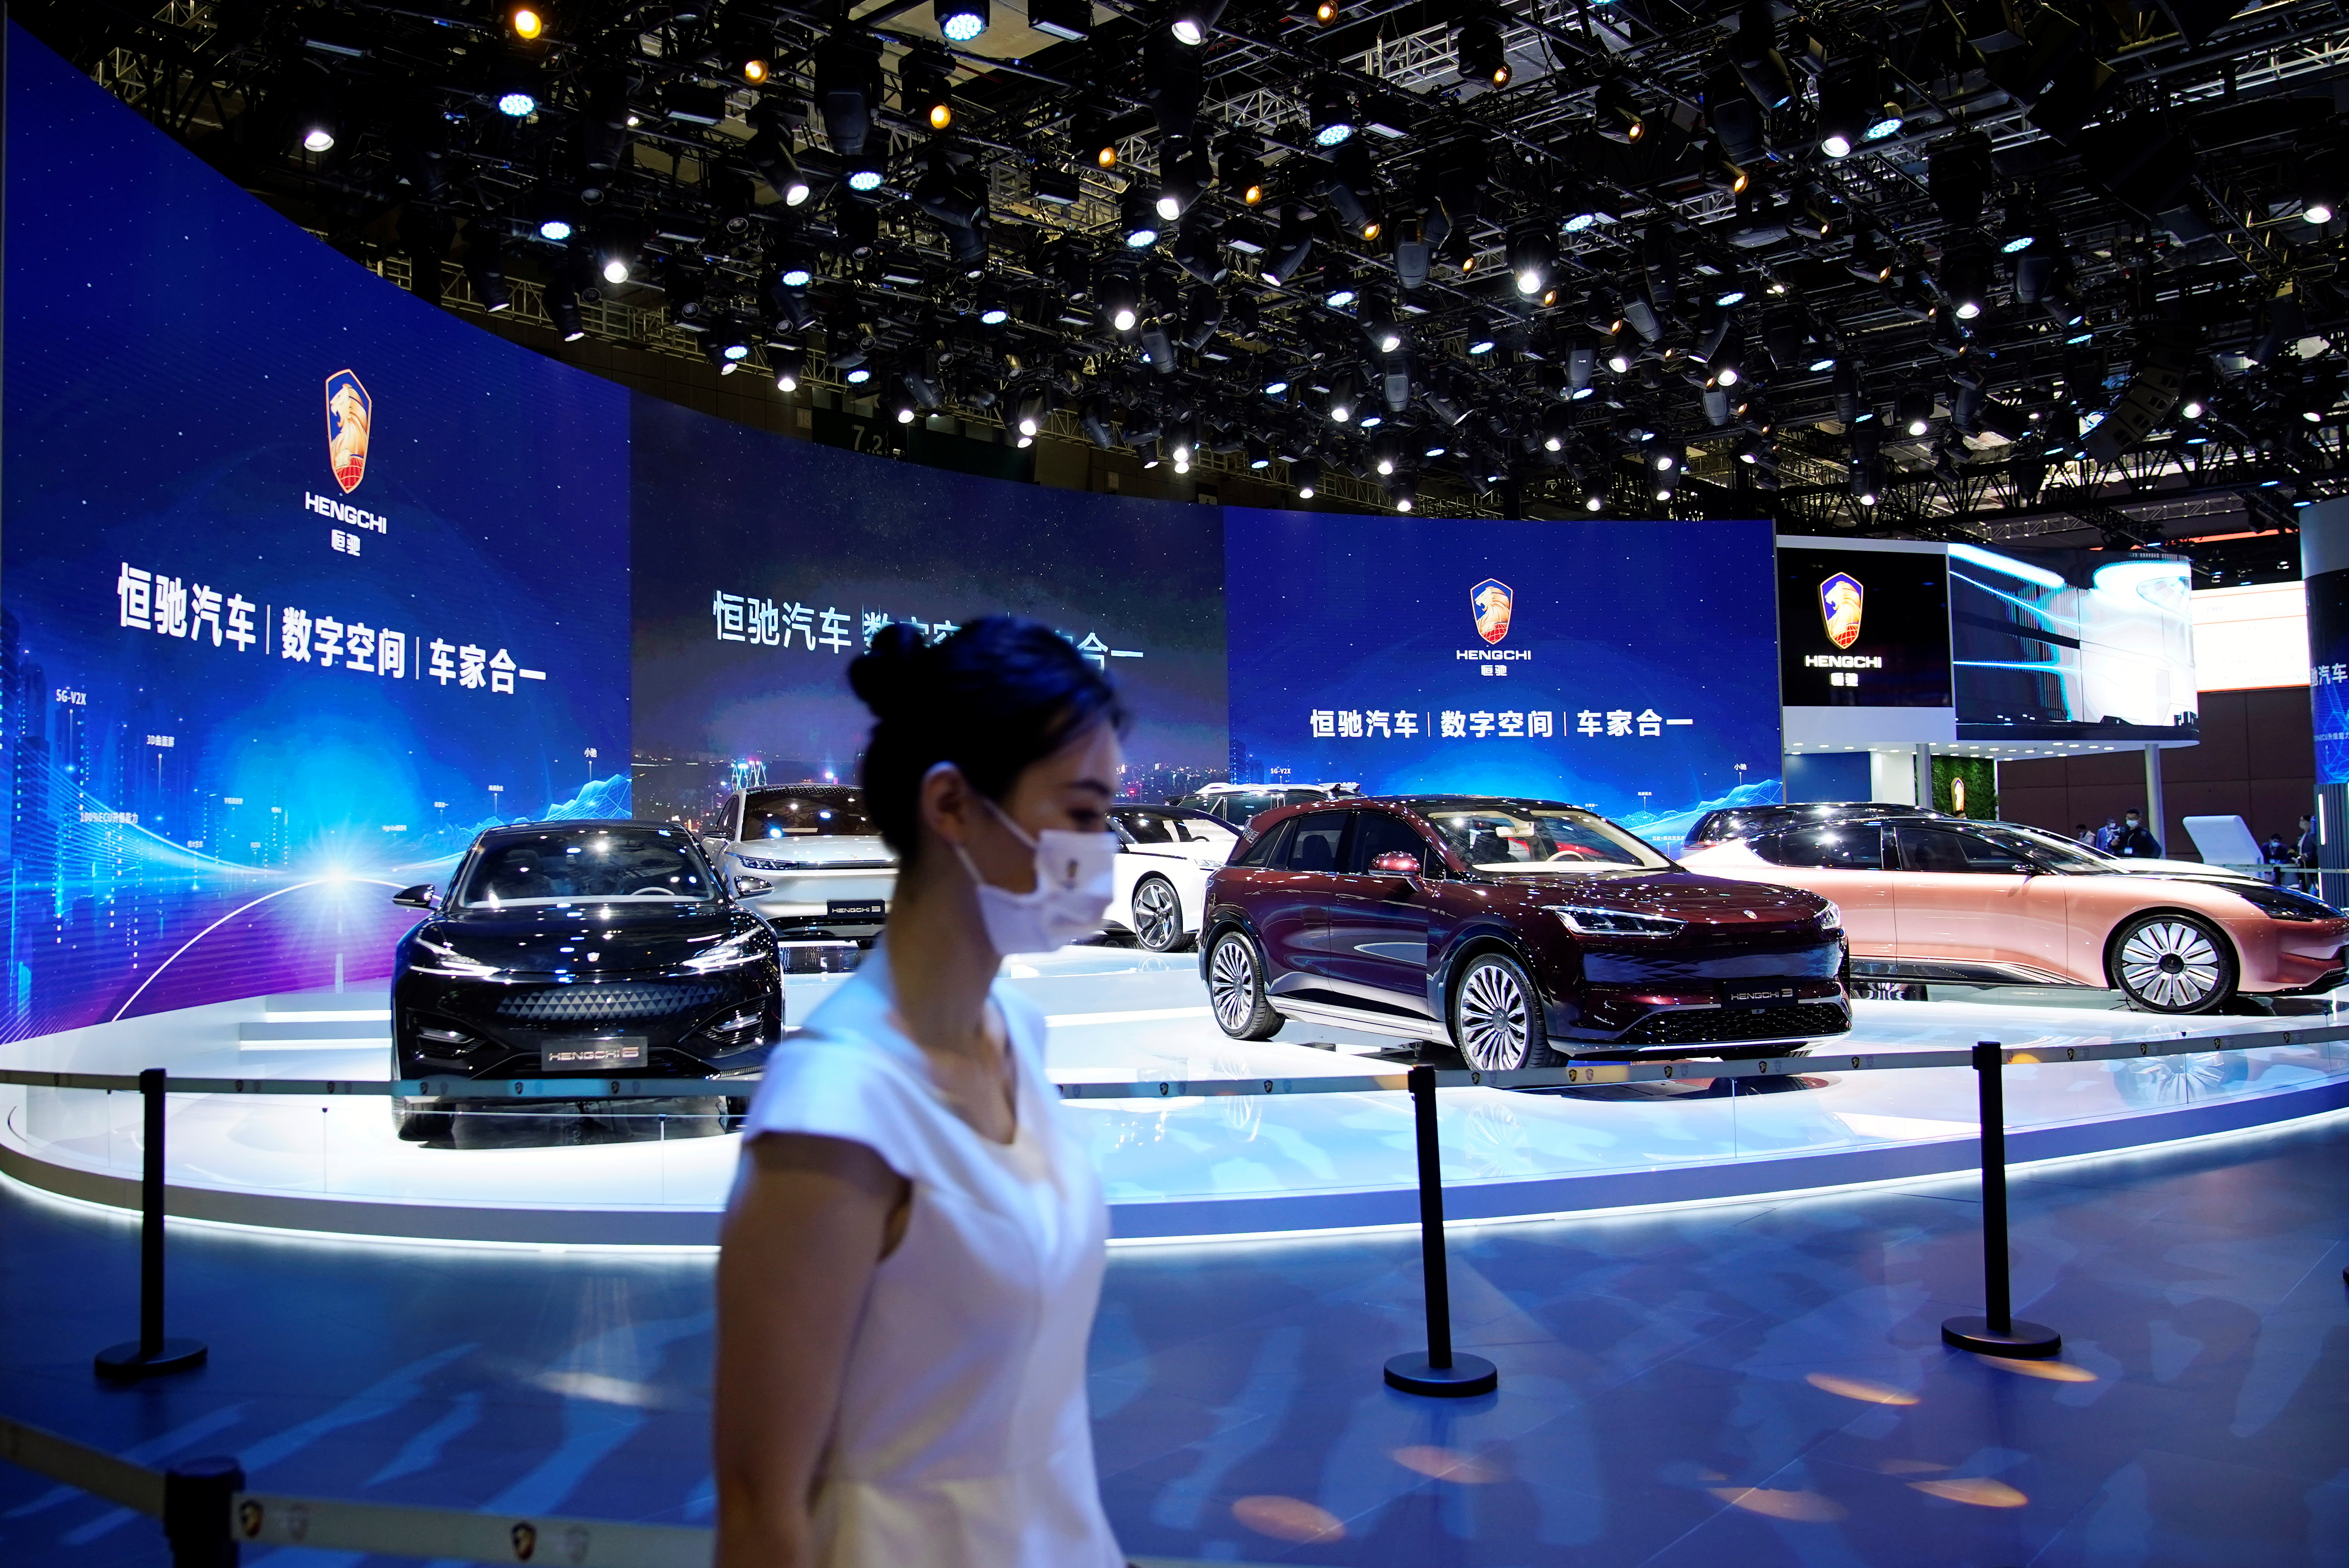 Evergrande Group's Hengchi electric vehicles (EV) are seen displayed at the Hengchi booth during a media day for the Auto Shanghai show in Shanghai, China April 19, 2021. REUTERS/Aly Song